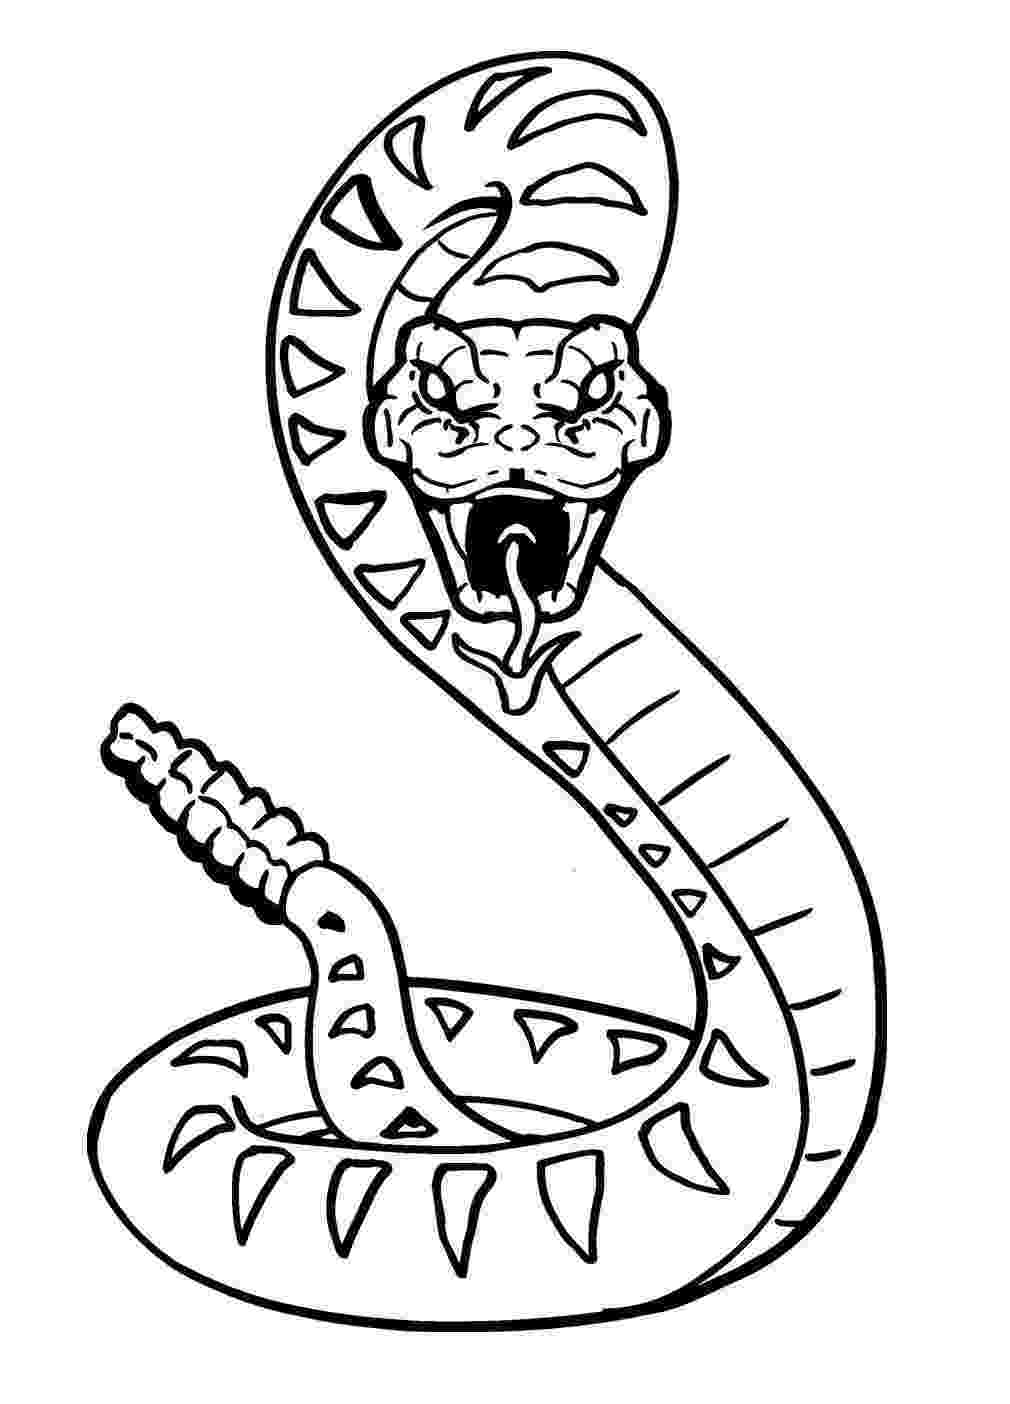 anaconda coloring page famous snake from amazon anaconda coloring page coloring sky page anaconda coloring 